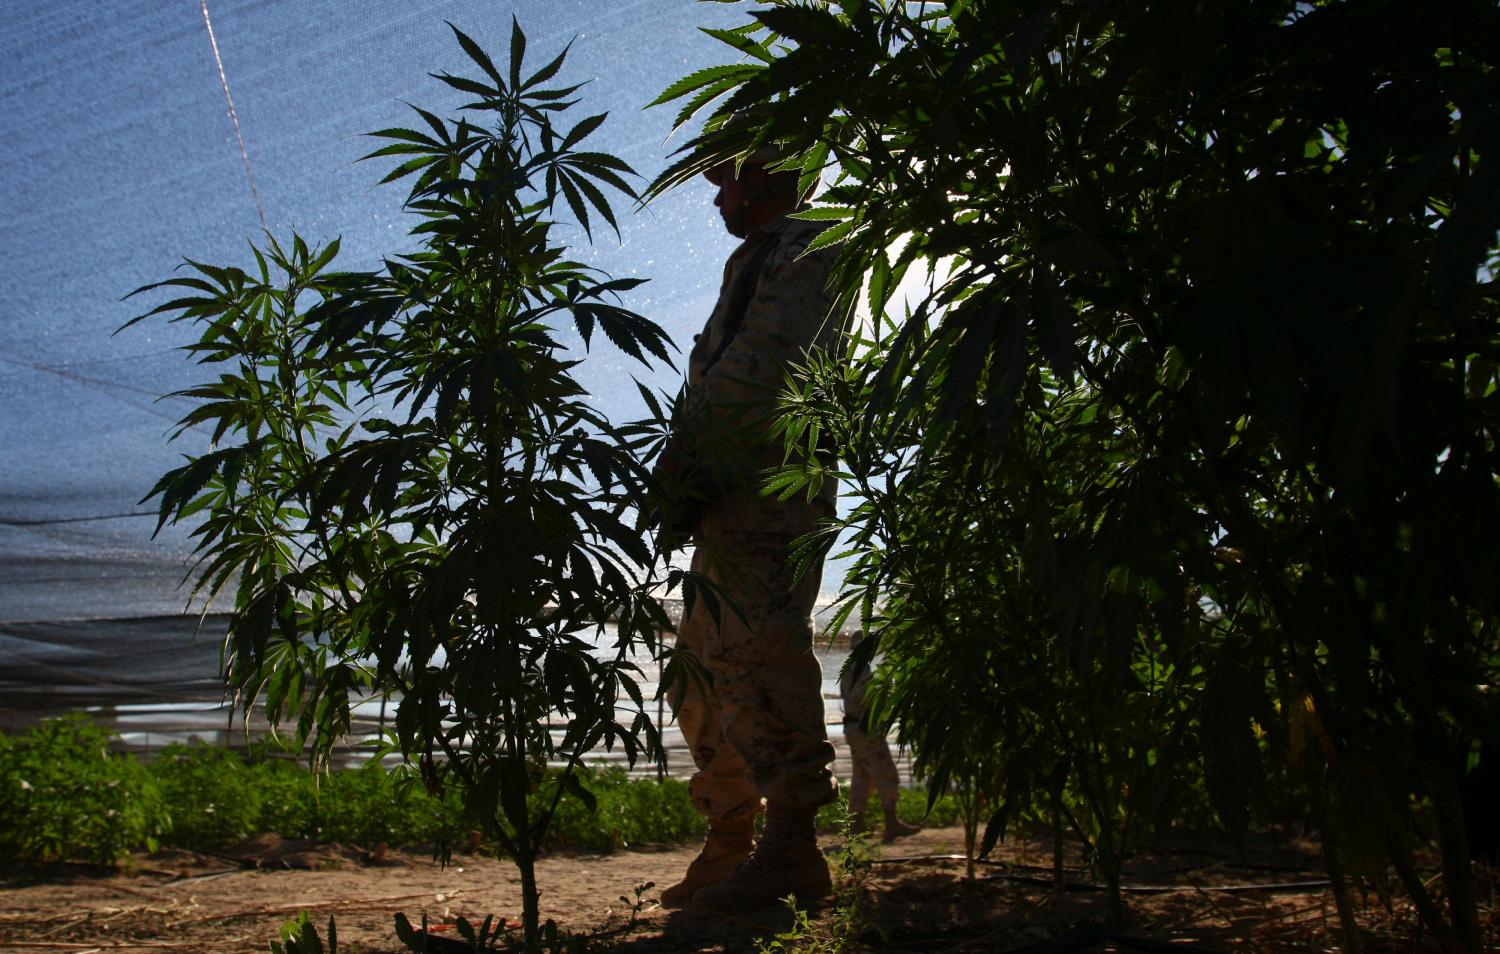 Soldiers stand guard at the biggest marijuana plantation found in Mexico, in San Quintin, about 350 km (220 miles) away from Tijuana, July 13, 2011. Mexican soldiers discovered the plantation in a remote desert surrounded by cactuses, a top army officer said on Thursday. Soldiers patrolling the area found 300 acres (120 hectares) of pot plants being tended by dozens of men on Tuesday, said General Alfonso Duarte. Picture taken July 13, 2011. REUTERS/Jorge Duenes (MEXICO - Tags: SOCIETY CRIME LAW MILITARY)